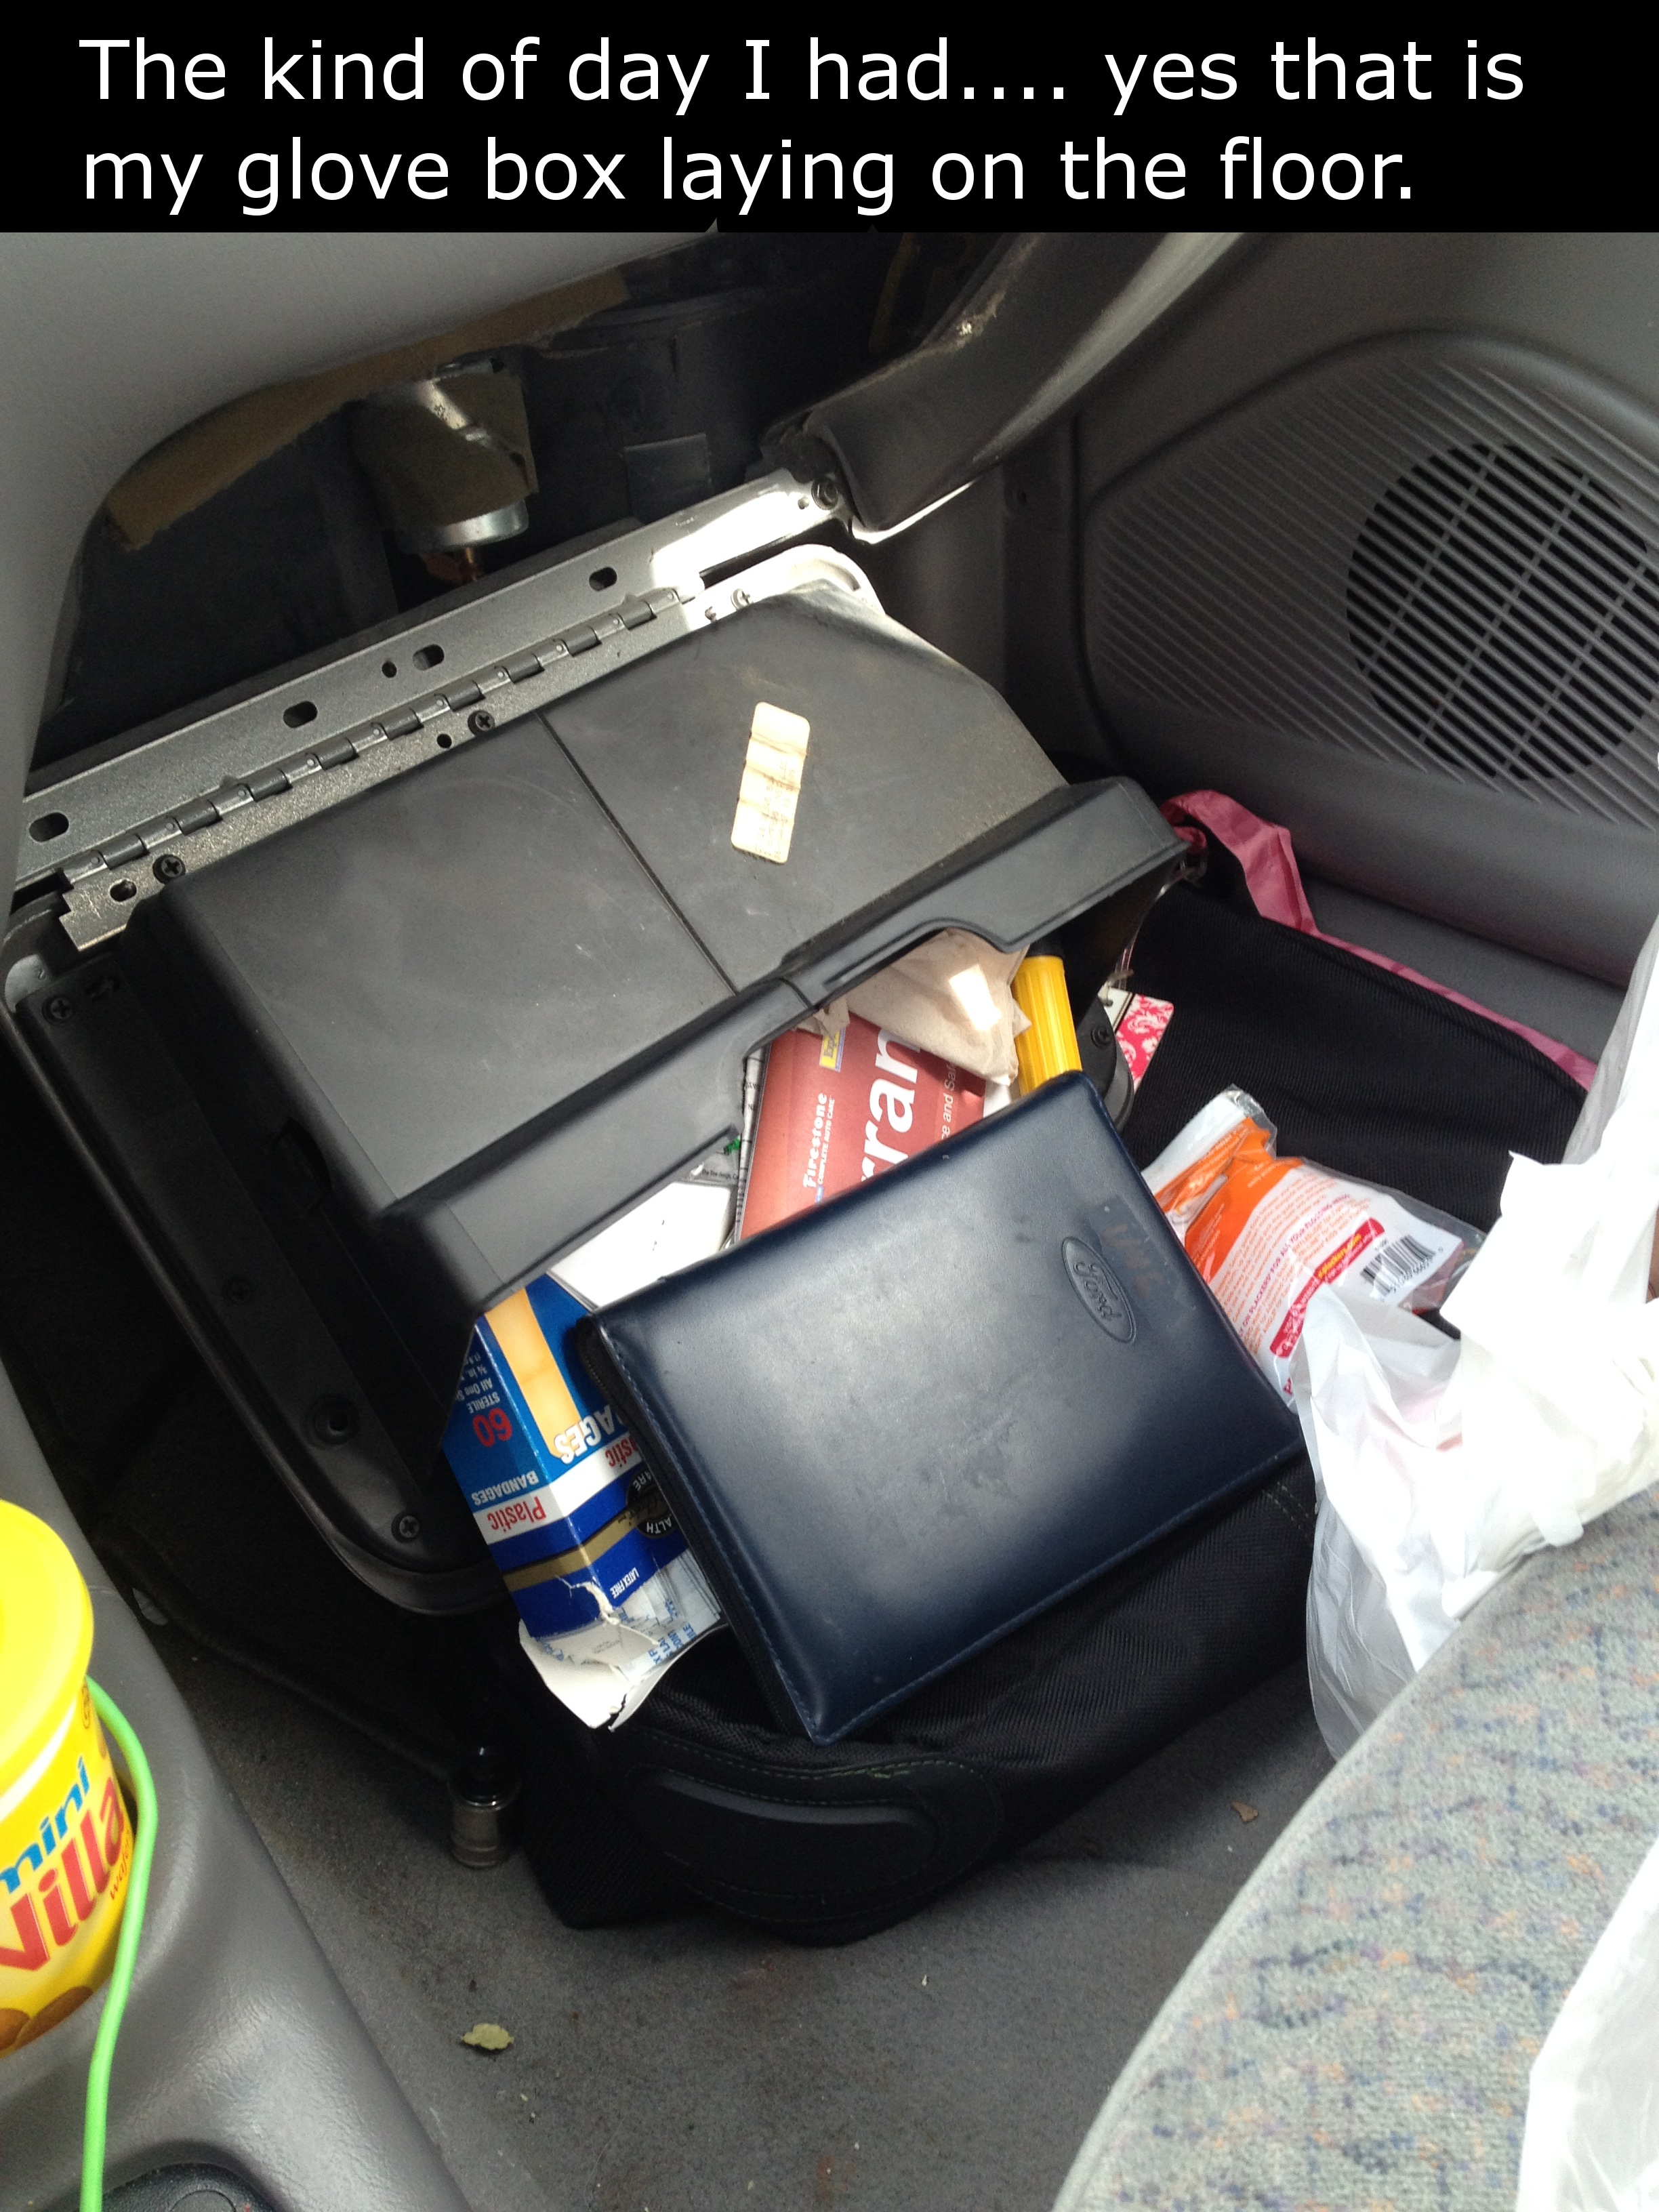 car seat cover - The kind of day I had.... yes that is my glove box laying on the floor.